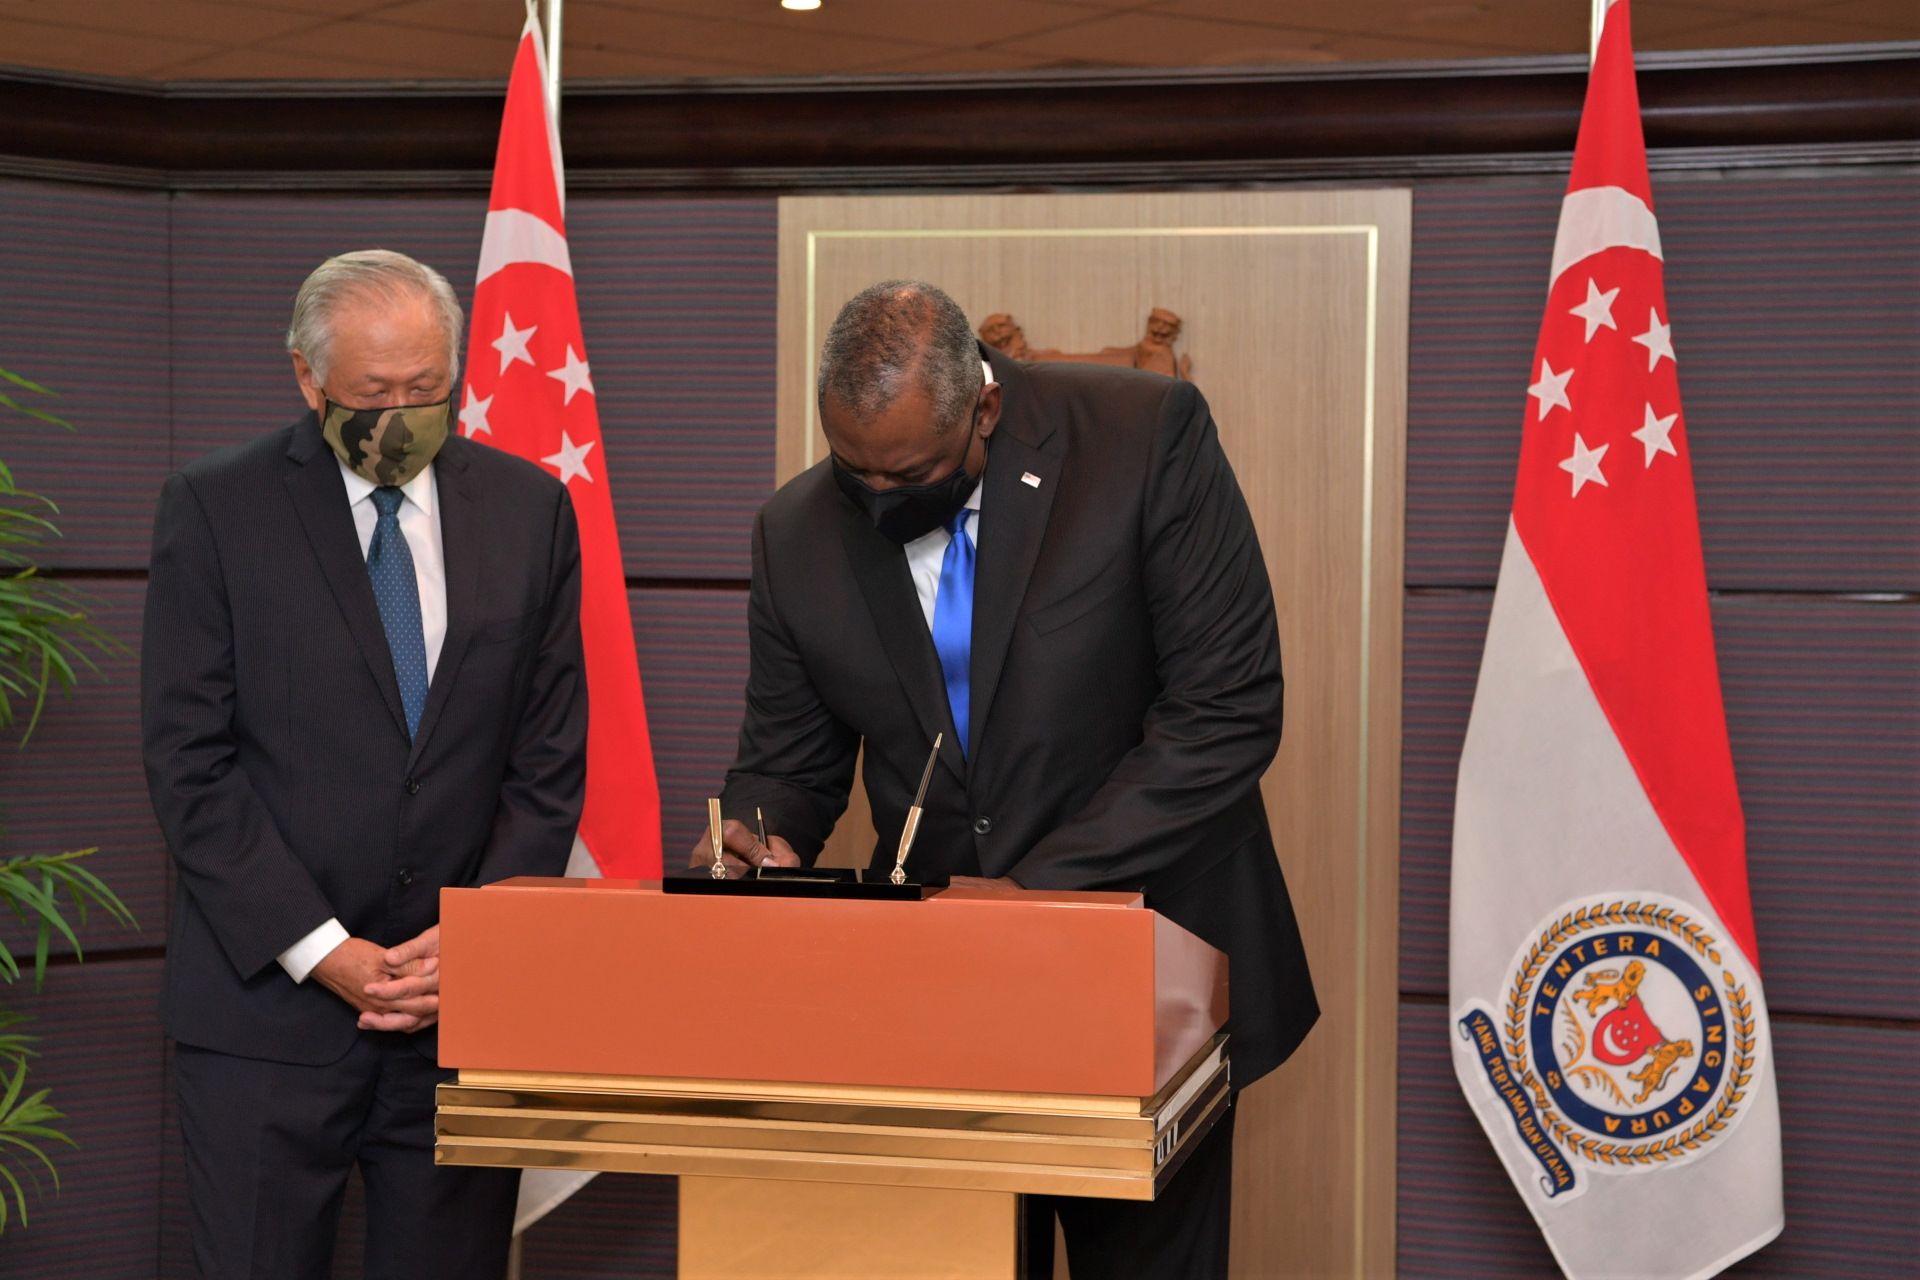 Secretary Austin signing the MINDEF guestbook. On his right is Minister for Defence Dr Ng Eng Hen.